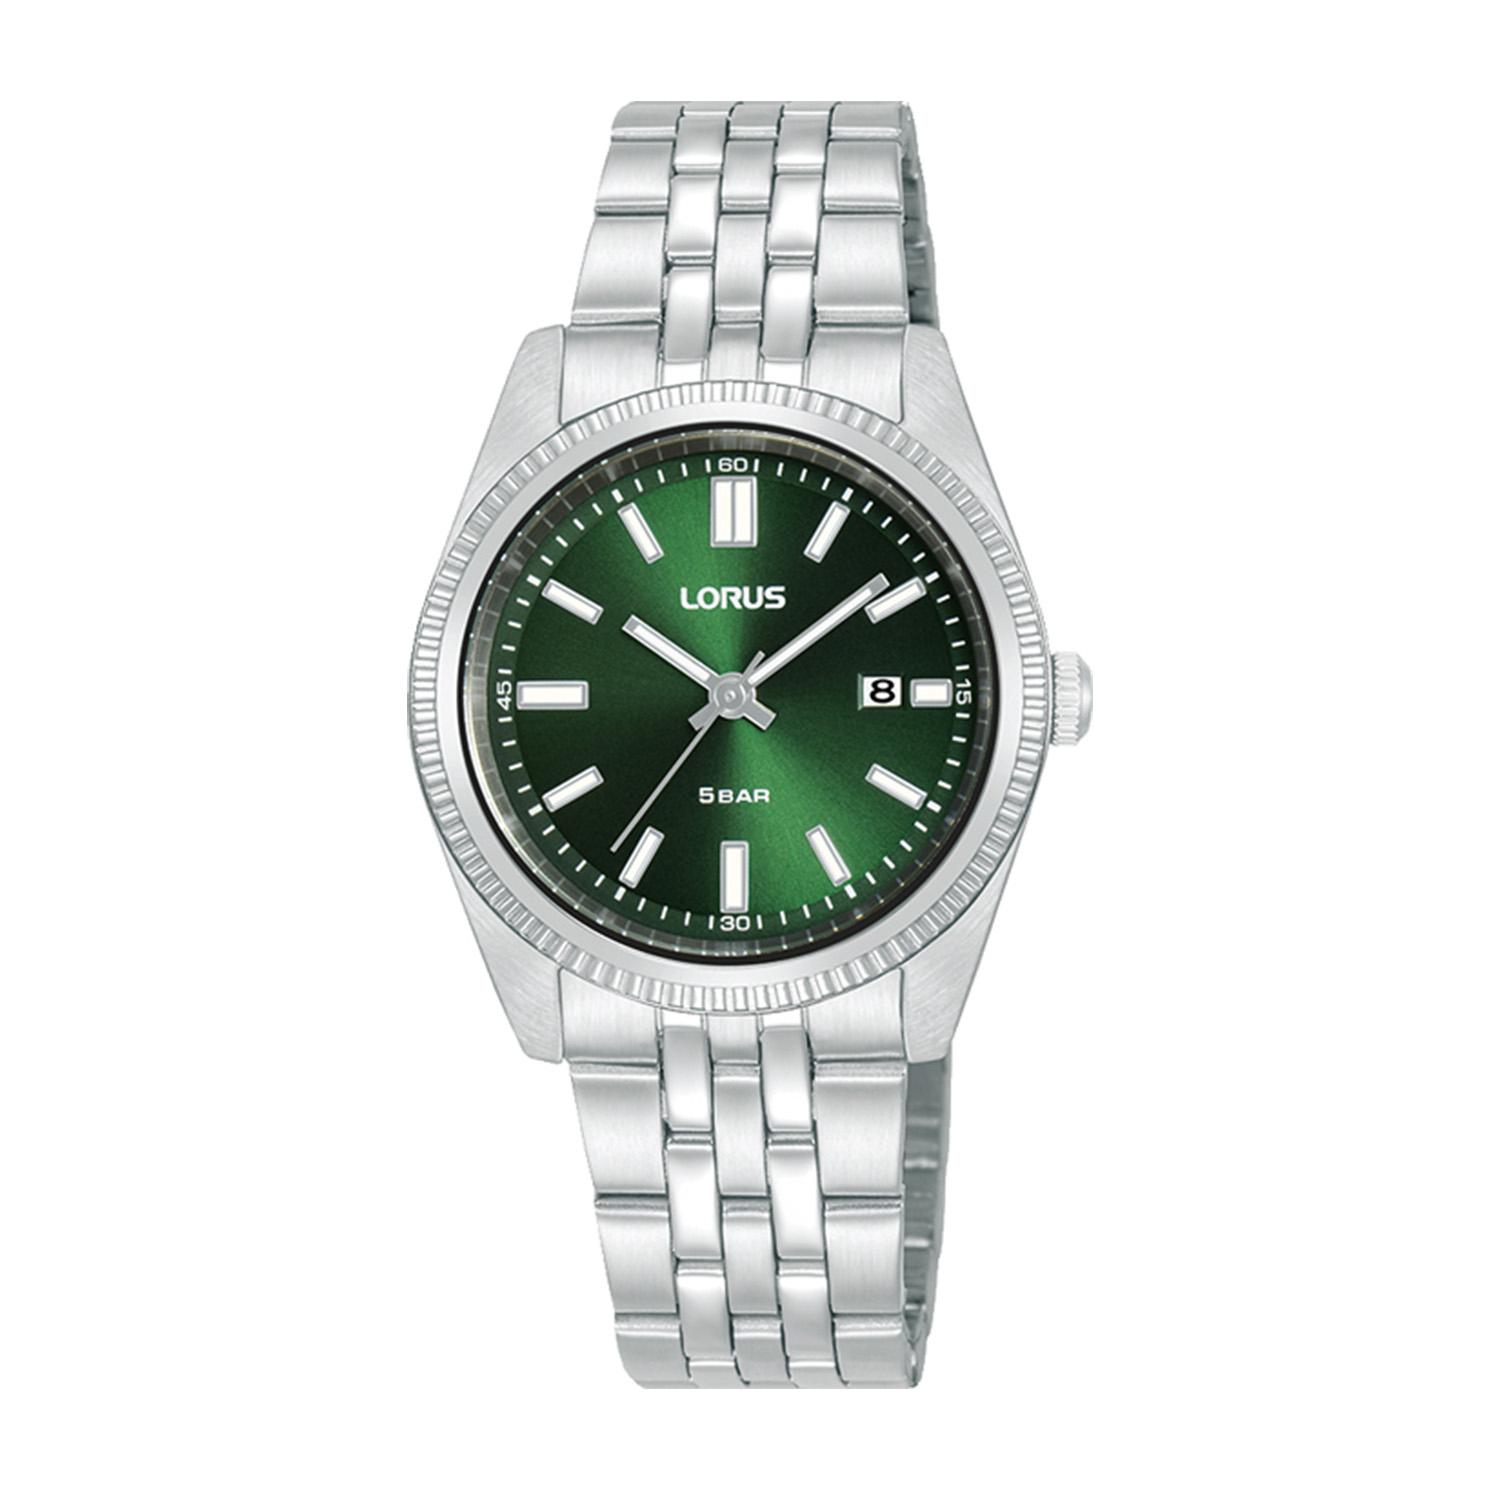 Womens watch LORUS made of silver stainless steel with green dial and bracelet.